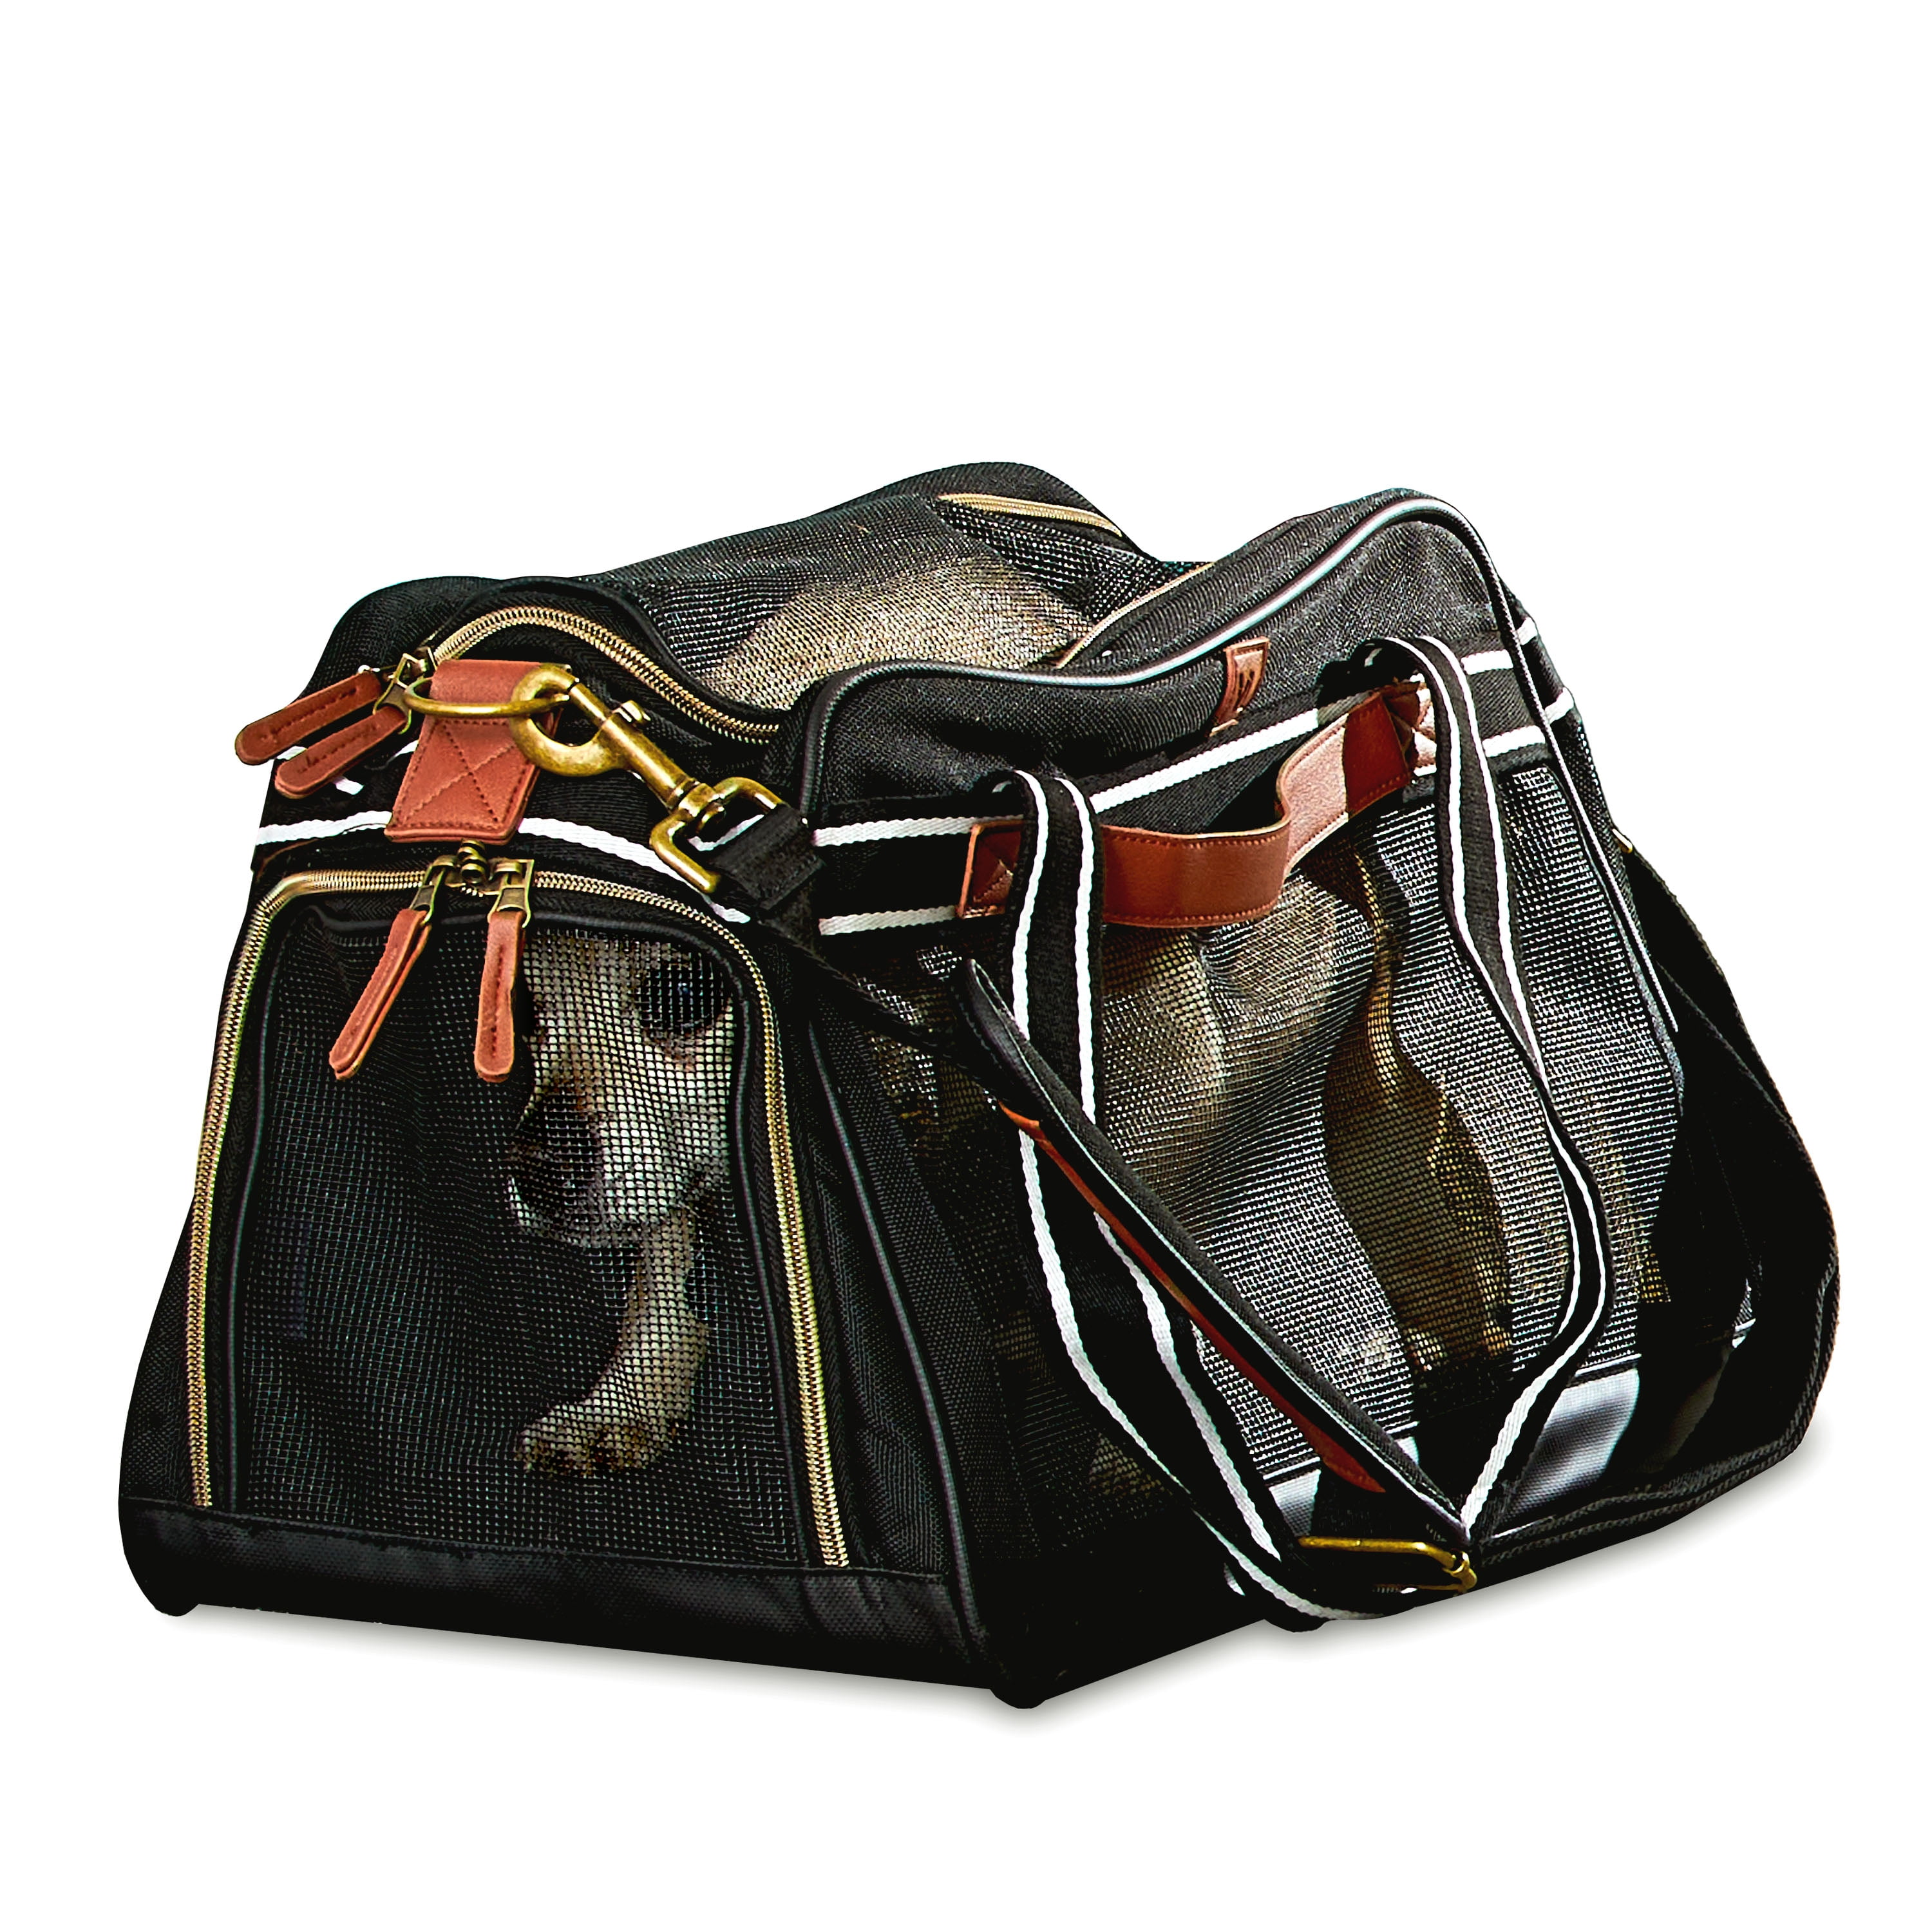 Louis Vuitton Dog Carrier - This one is perfect for traveling and airline  approved!